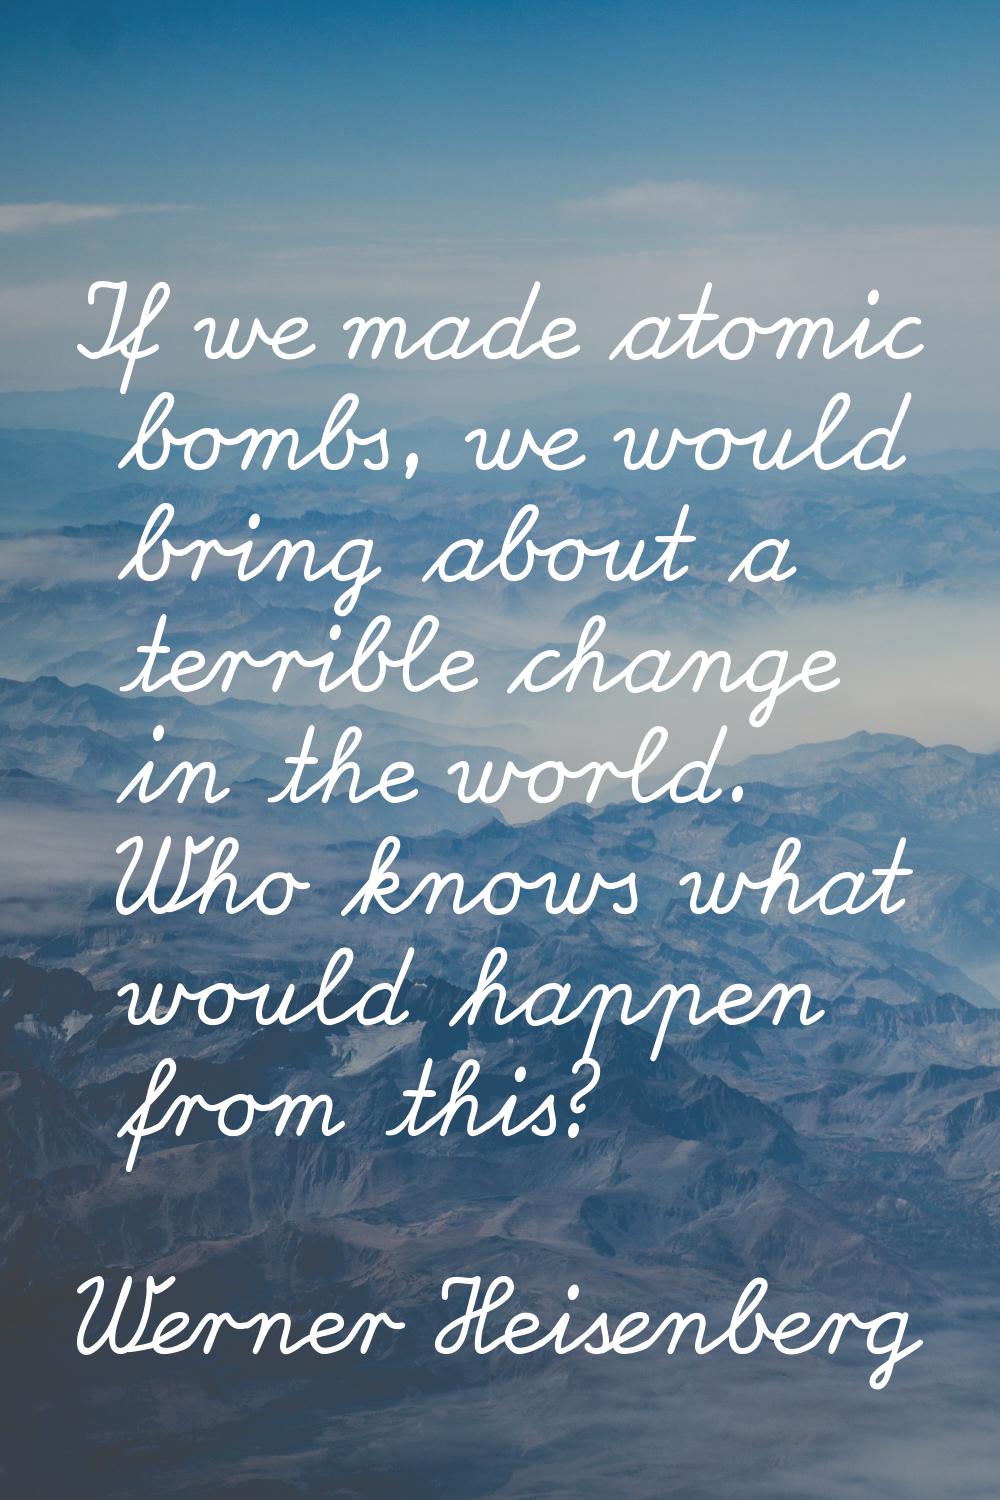 If we made atomic bombs, we would bring about a terrible change in the world. Who knows what would 